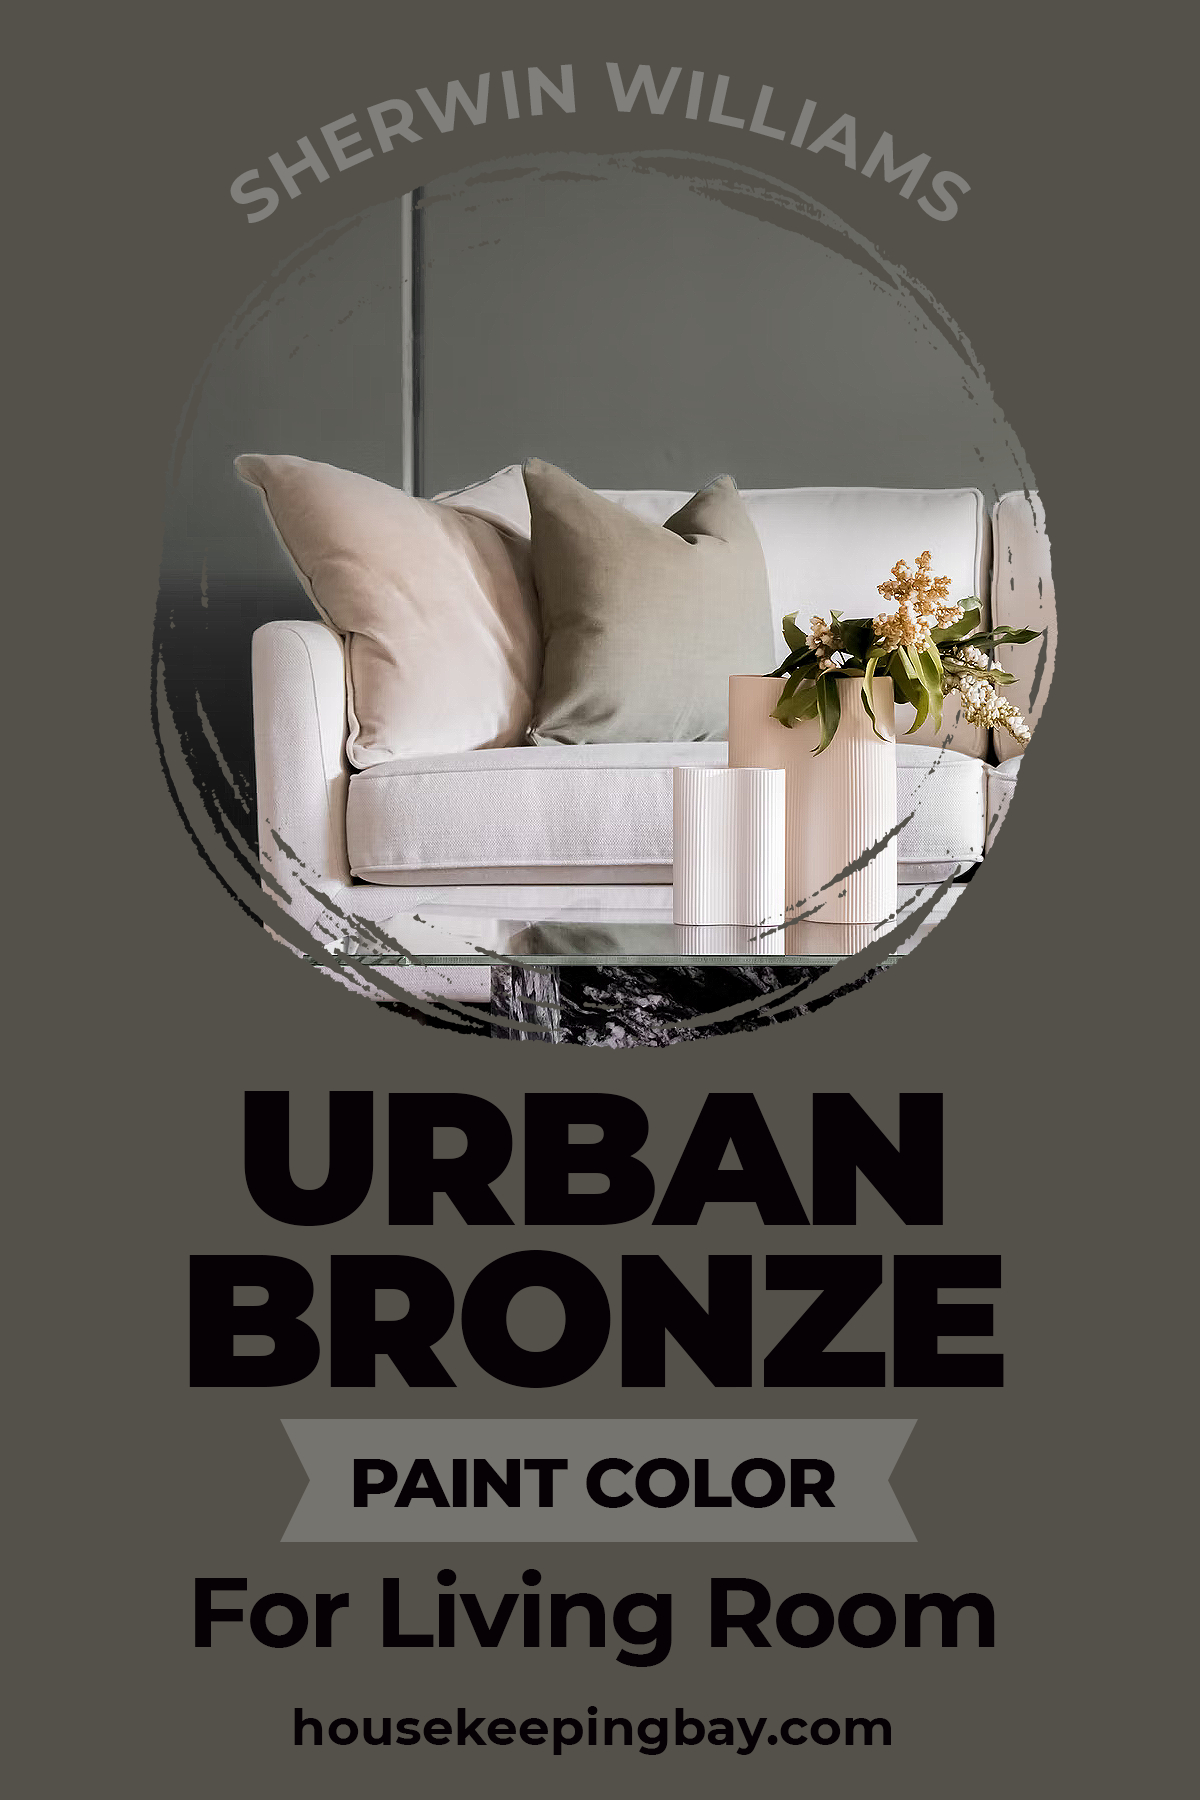 Urban Bronze Paint Color for living room